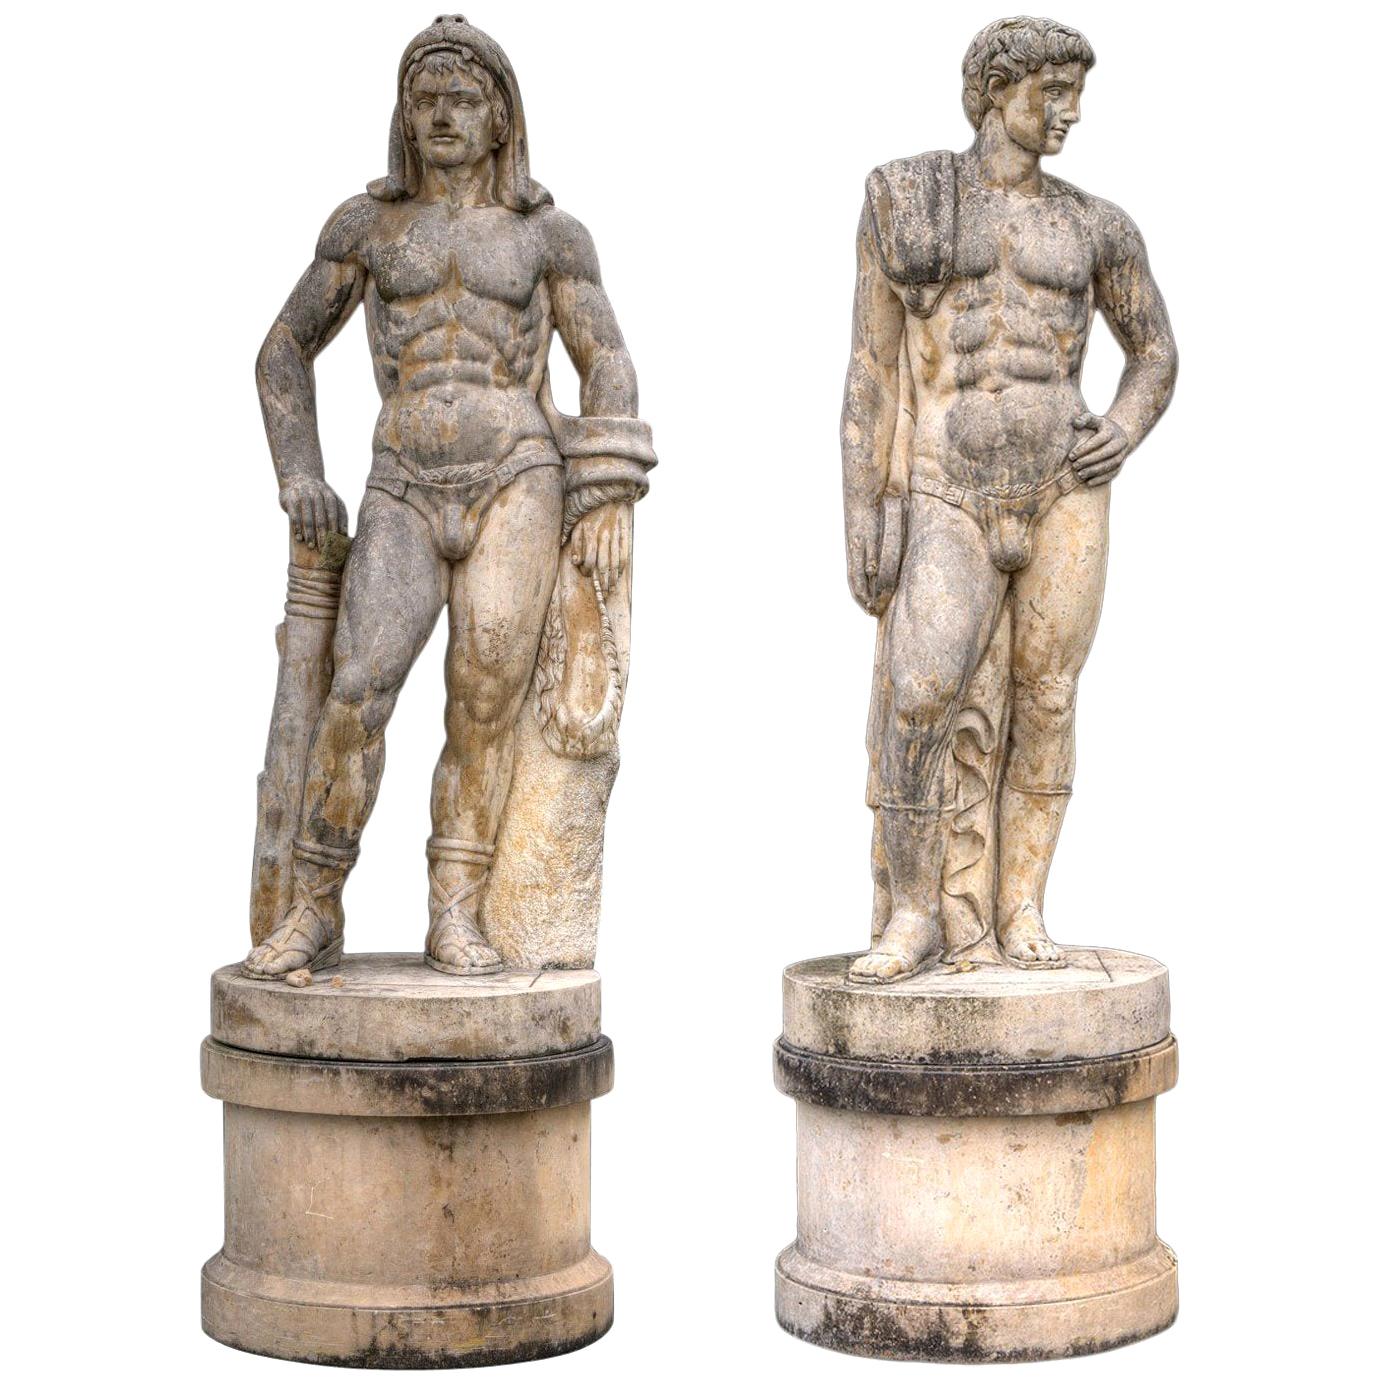 Pair of Monumental Rationalist Marble Sculptures of Hercules and Discobolo